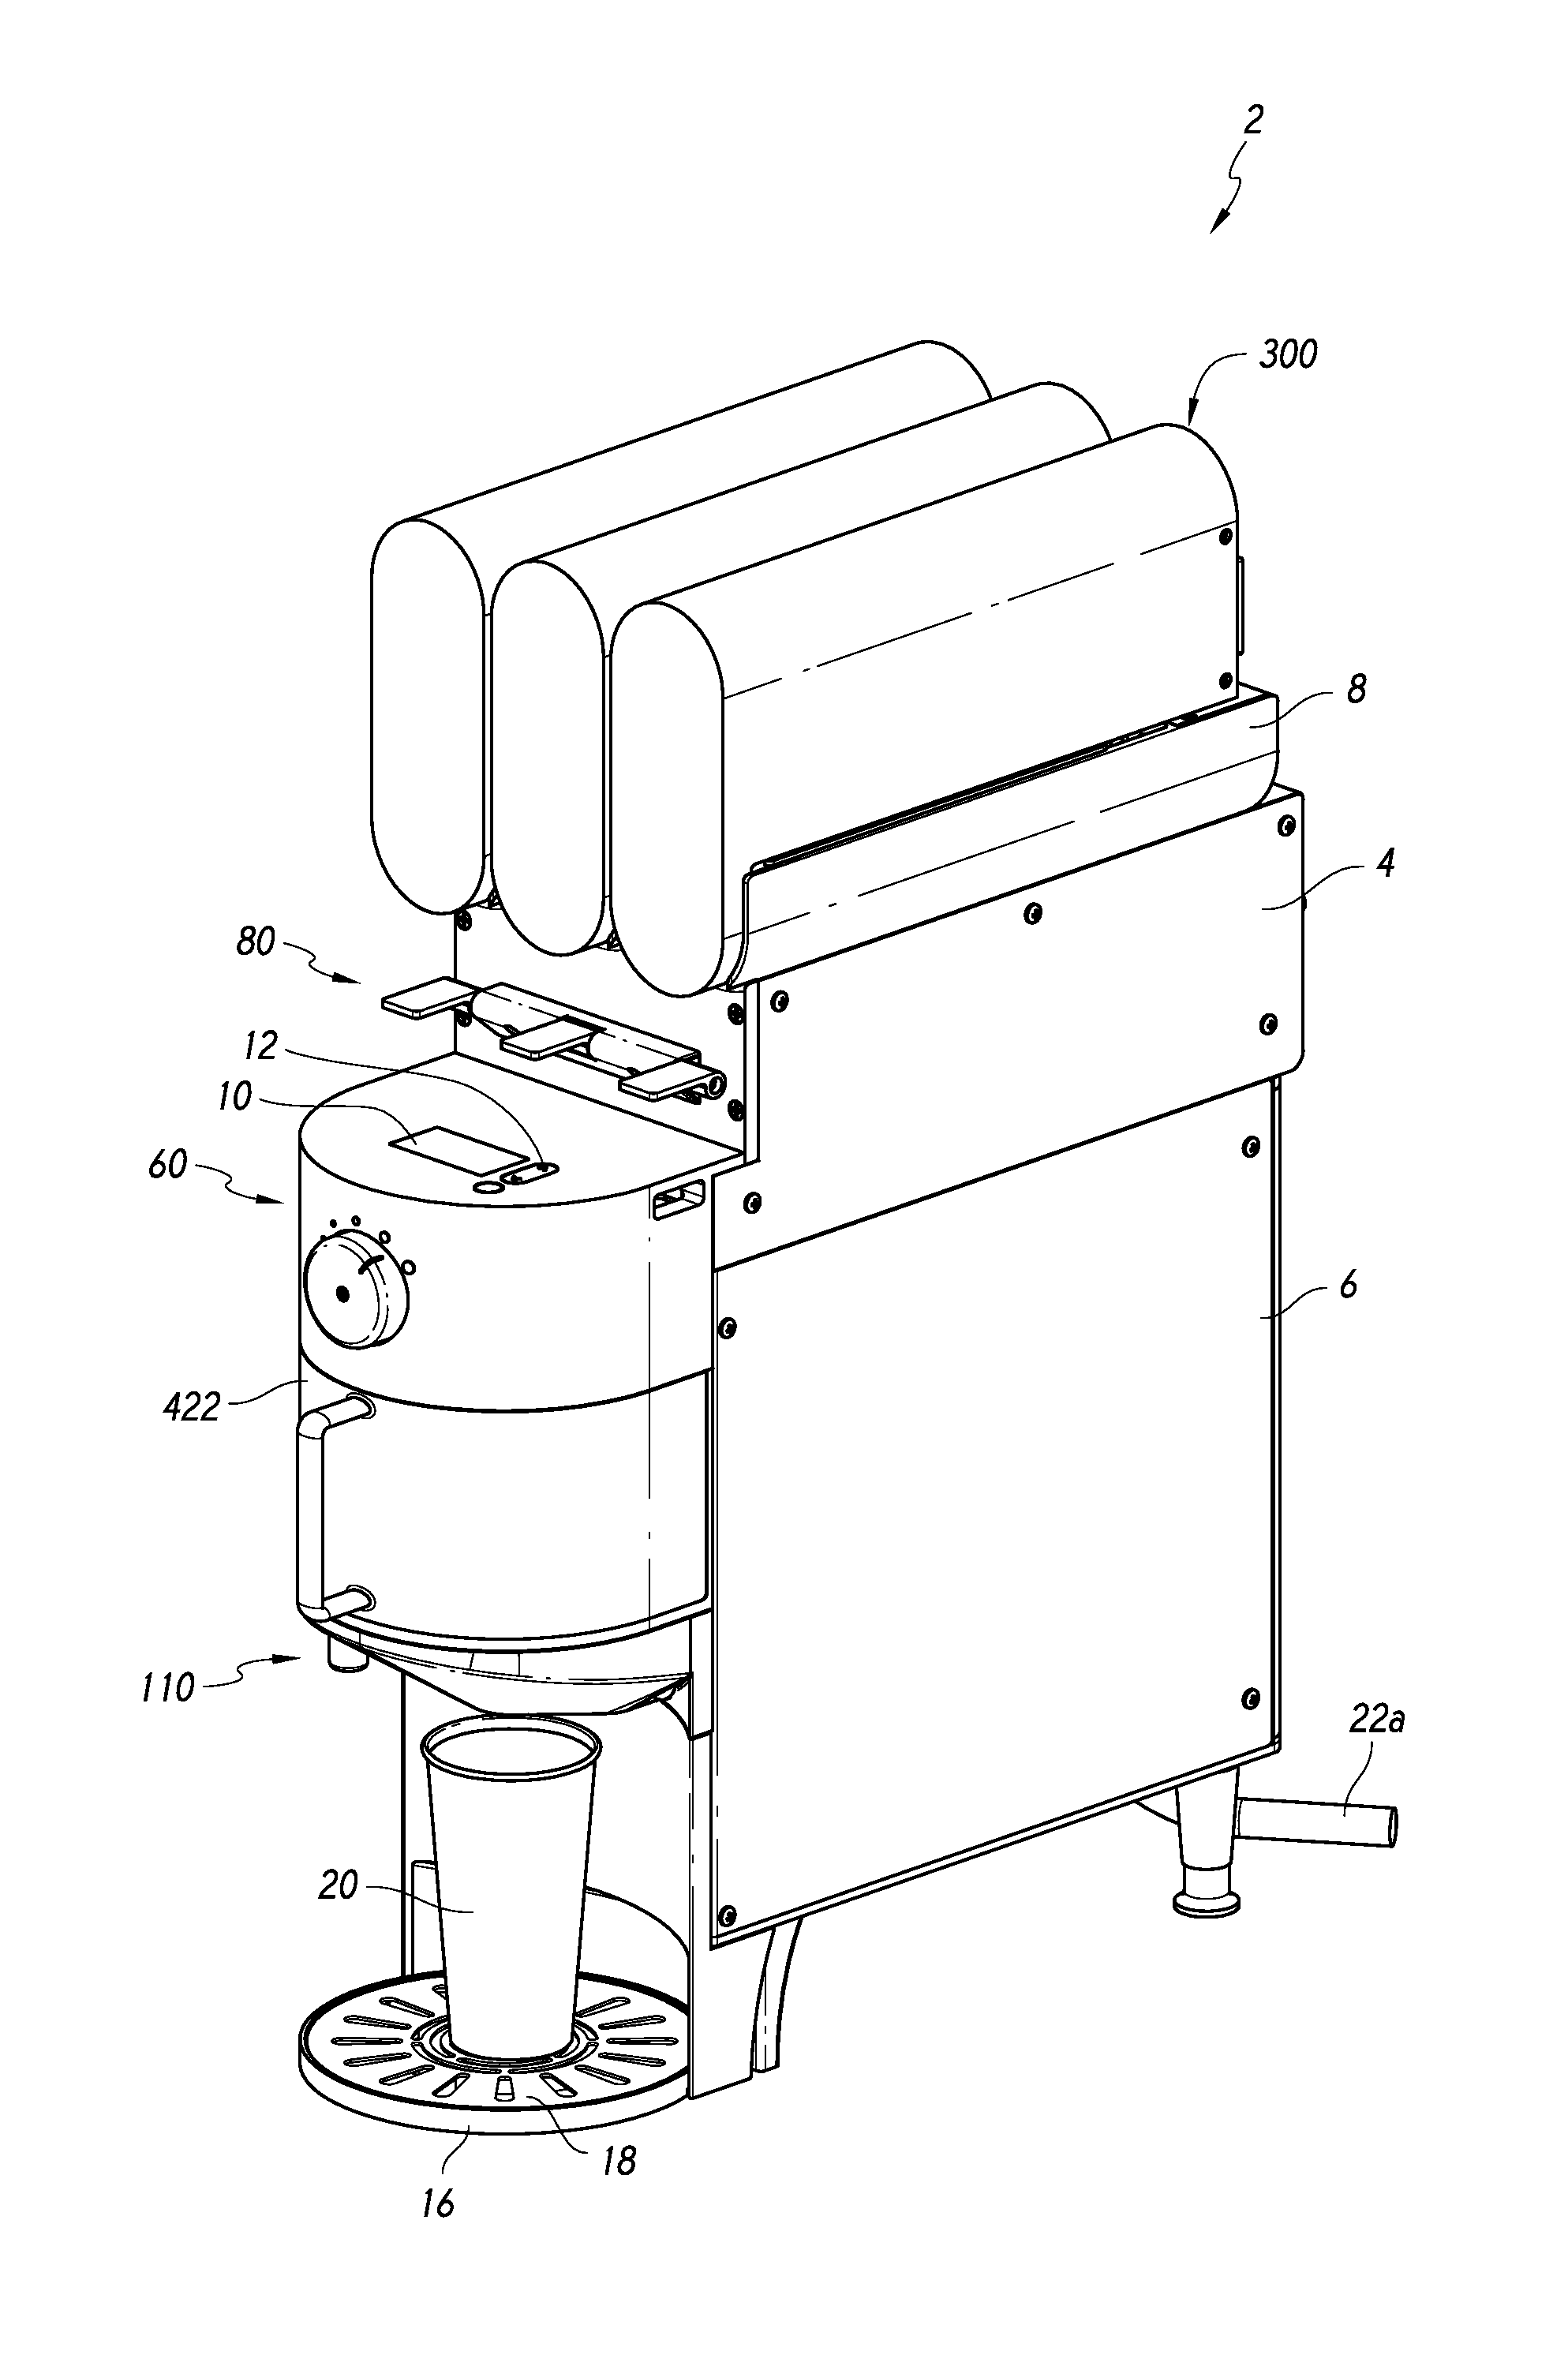 Apparatuses, systems, and methods for brewing a beverage